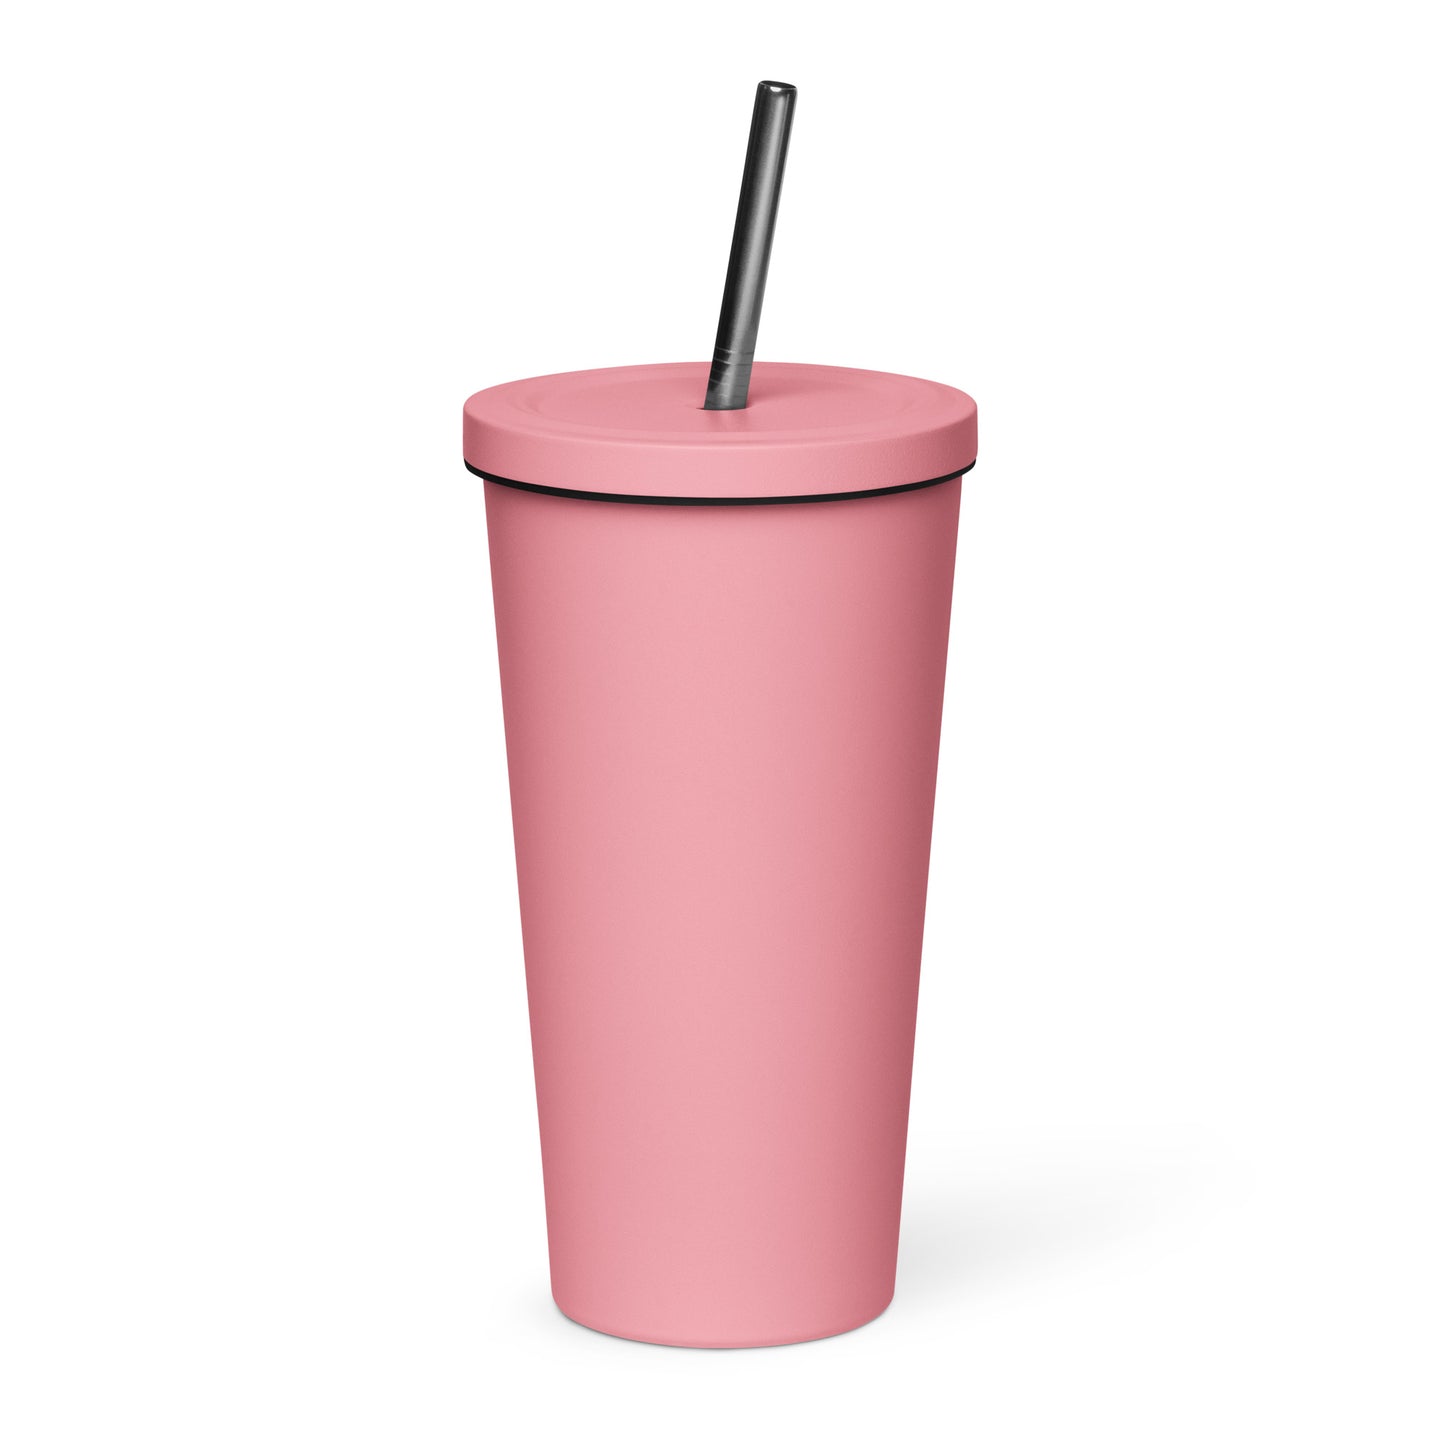 Insulated tumbler with a straw- Crazy Horse 23 - offthespeed